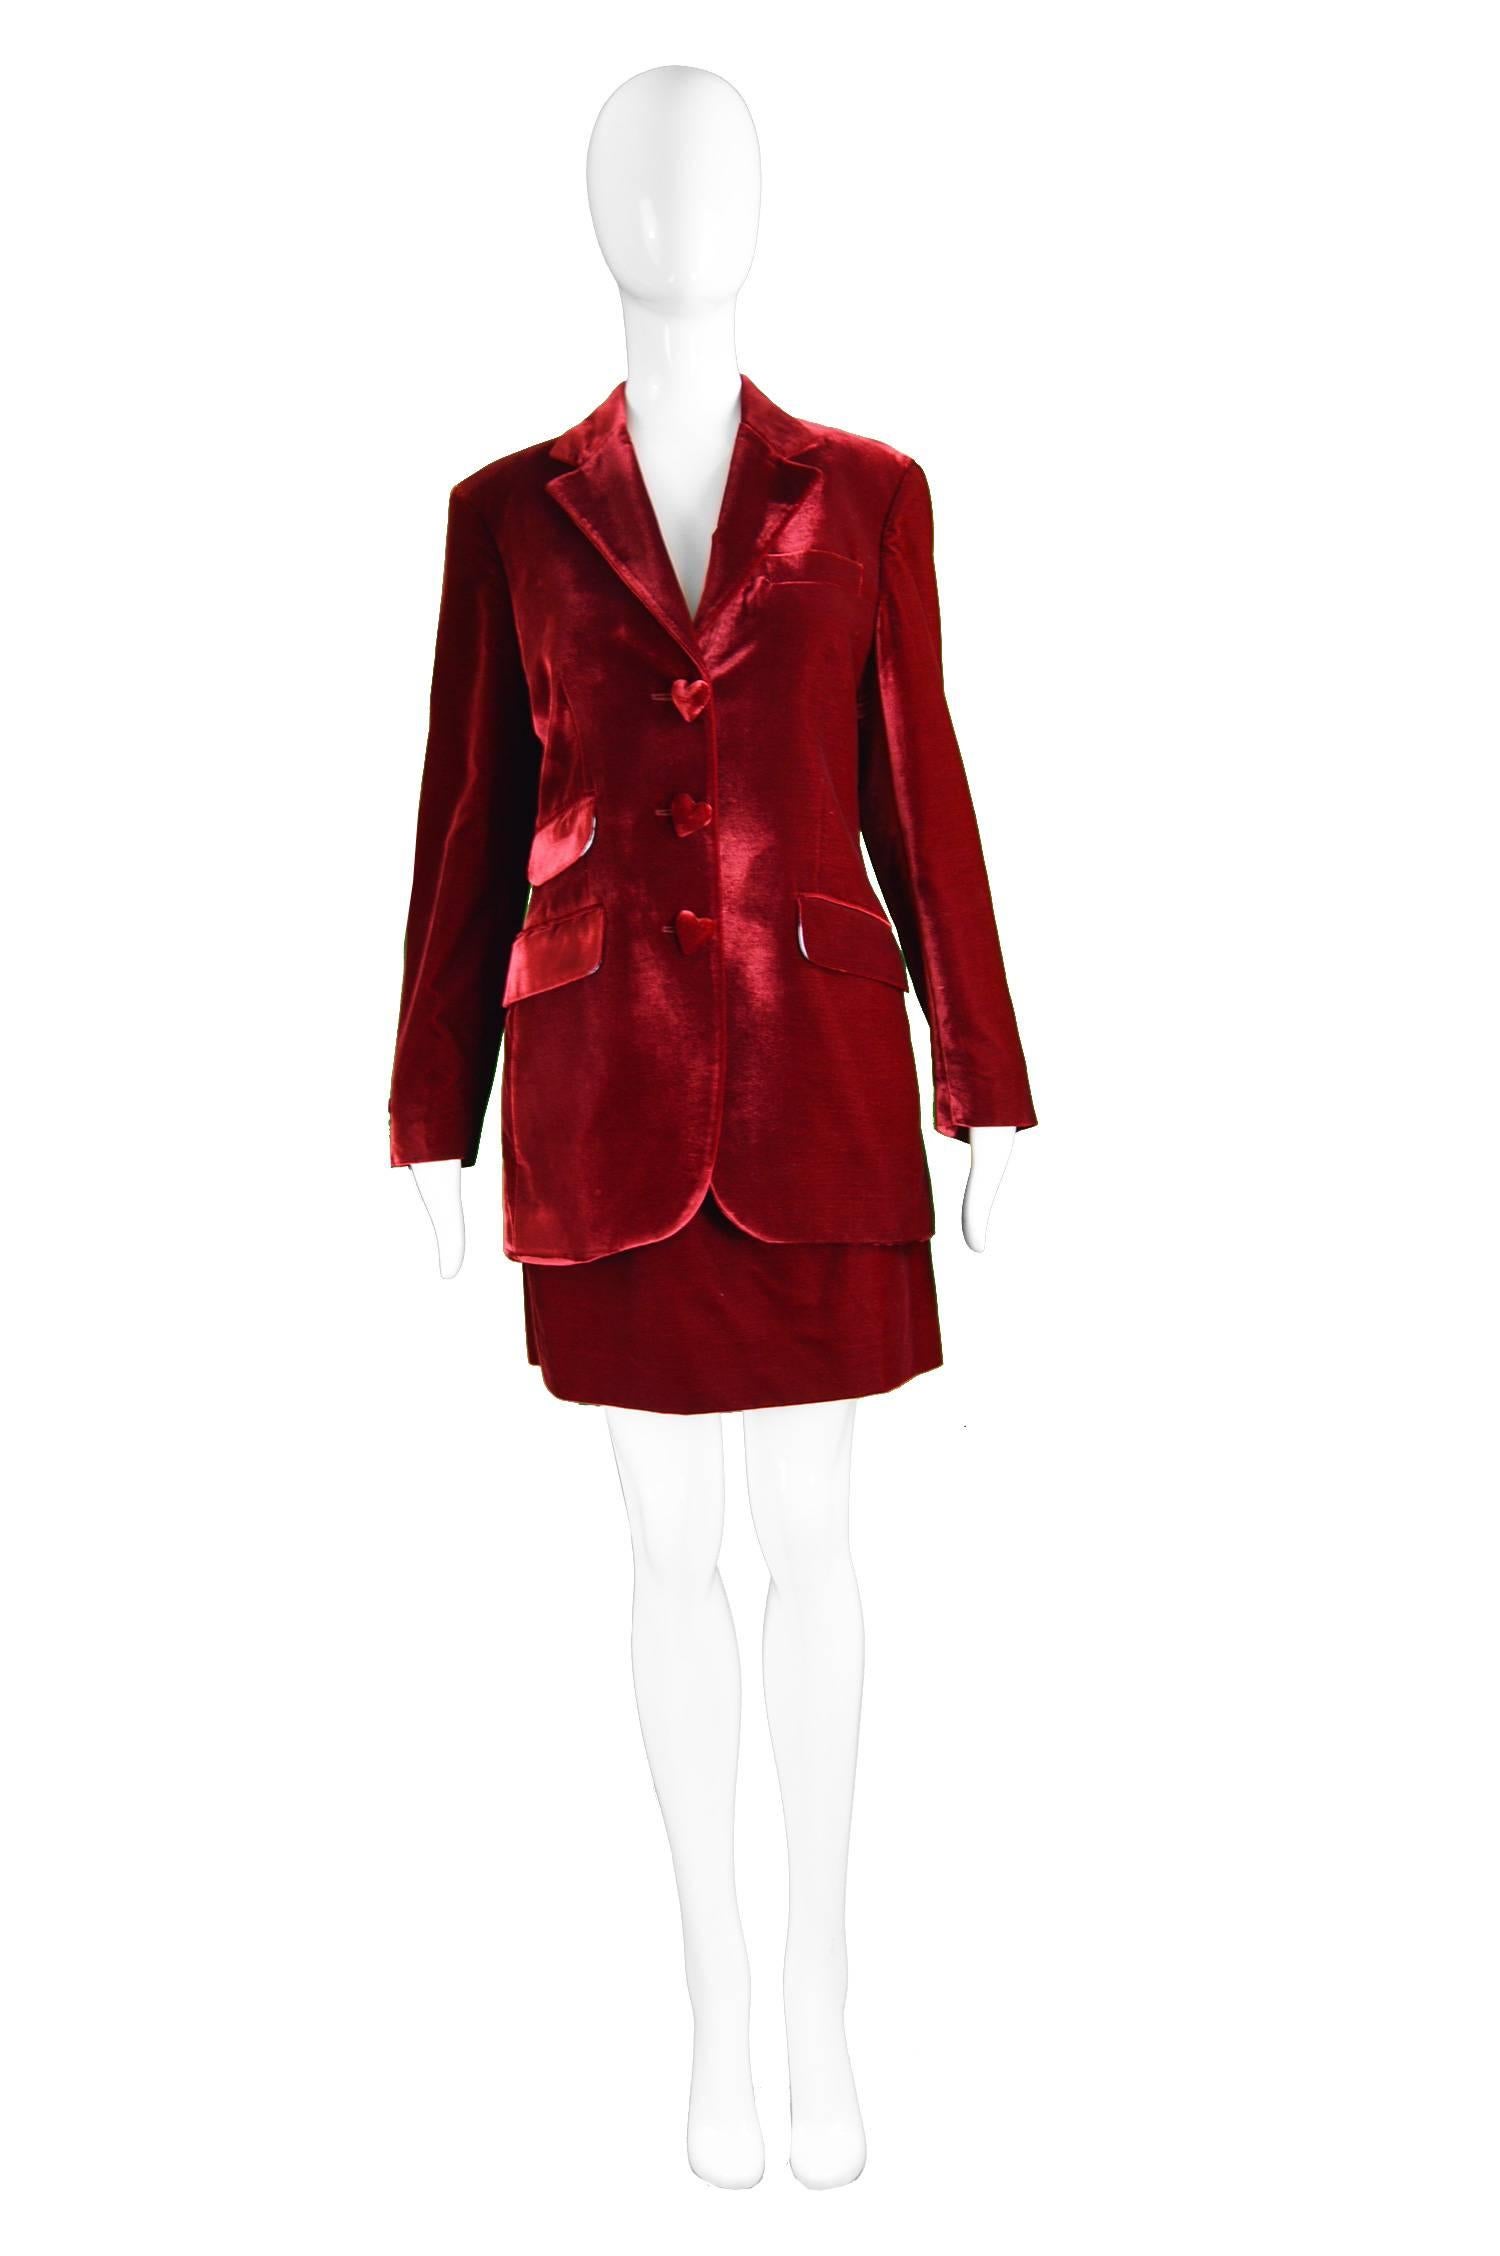 Moschino Deep Red Velvet Heart Button Skirt Suit & Cloud Silk Lining, 1990s


Size: Jacket is marked a UK 10, skirt a  UK 12 but both pieces fit a UK 10 / US 6/ EU 38 best due to the slightly roomier fit of the jacket. Please check